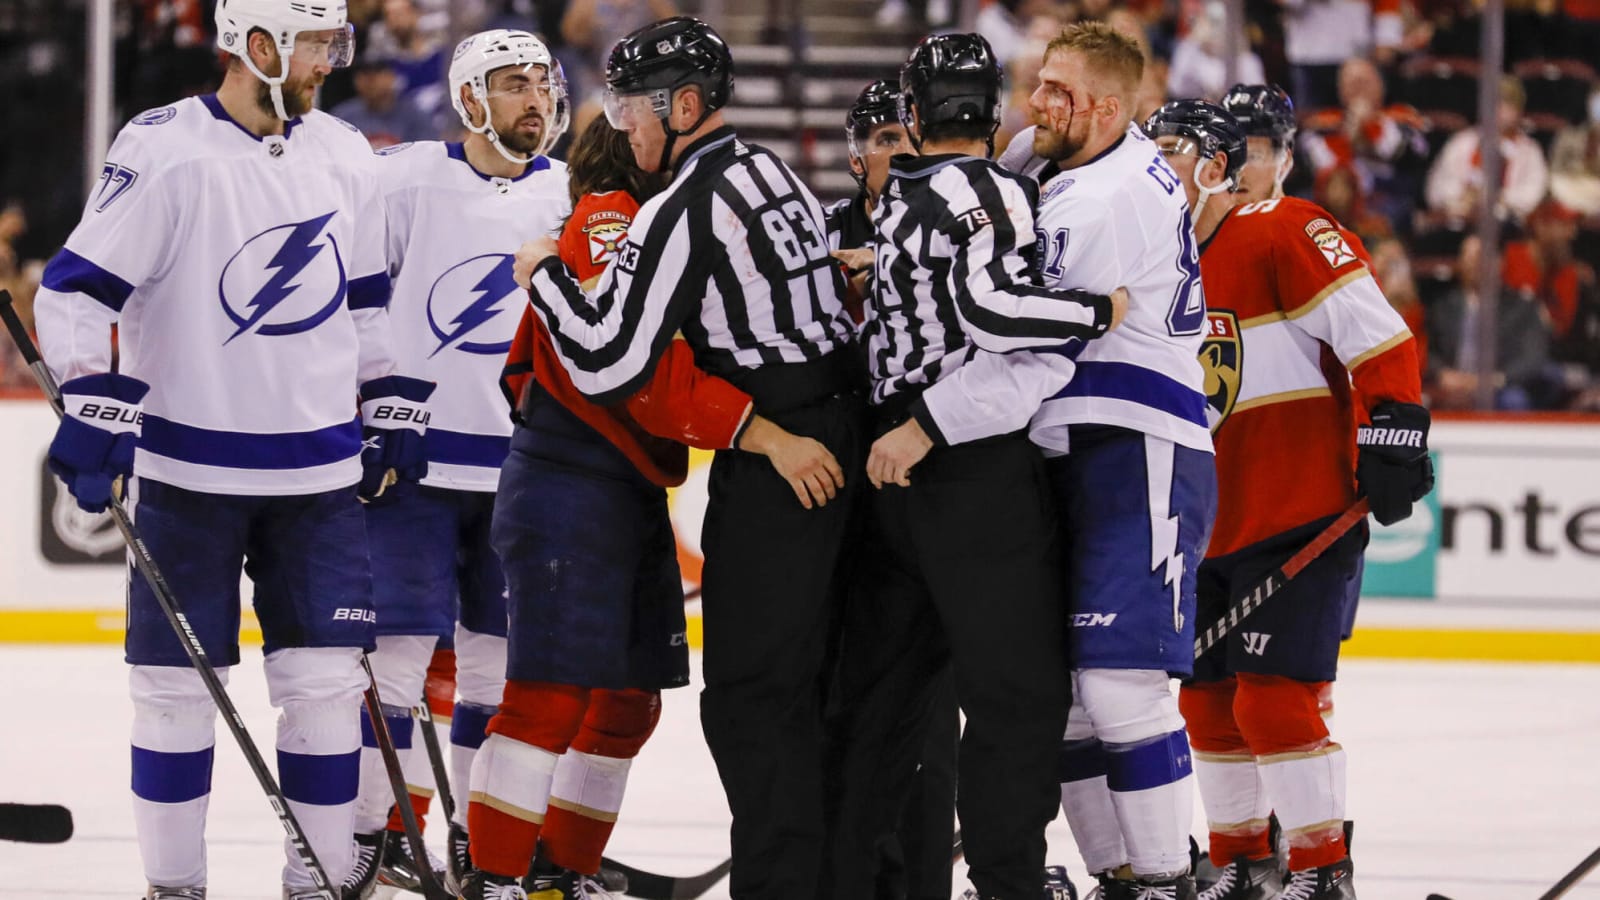 Panthers' Lomberg suspended a game for instigating fight